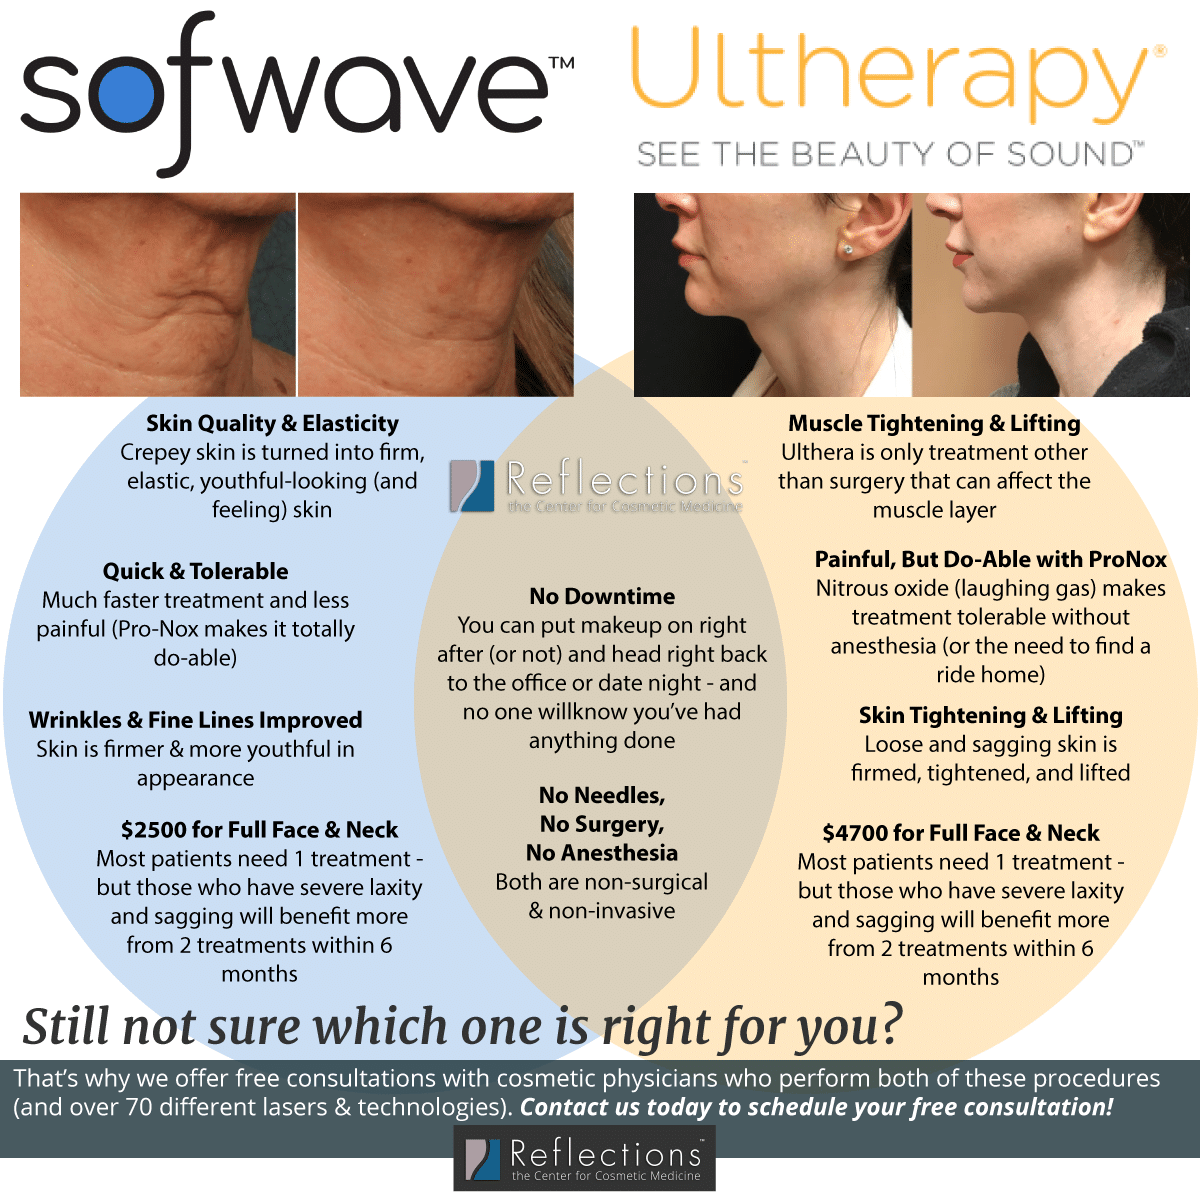 Which is better Ulthera or Sofwave